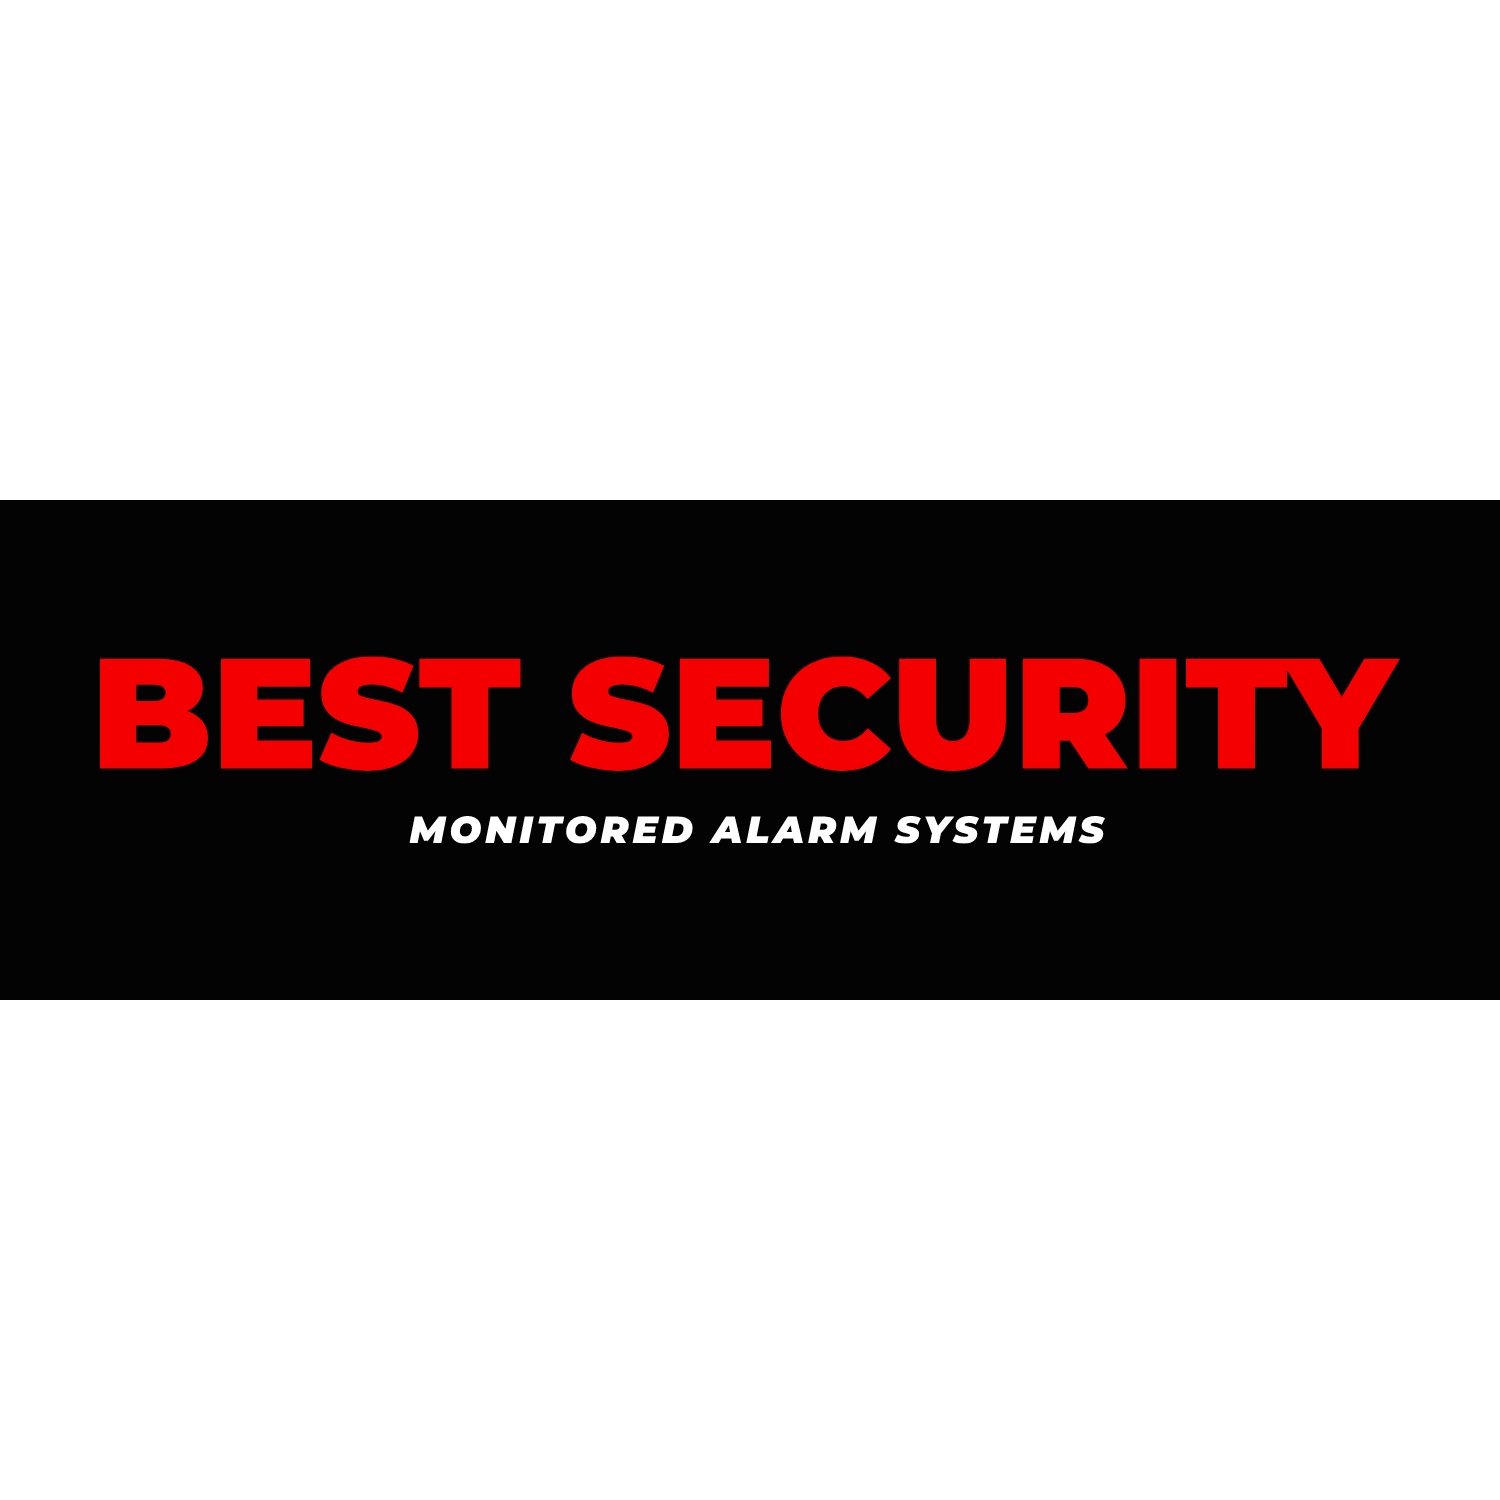 Best Security Monitored Alarm Systems